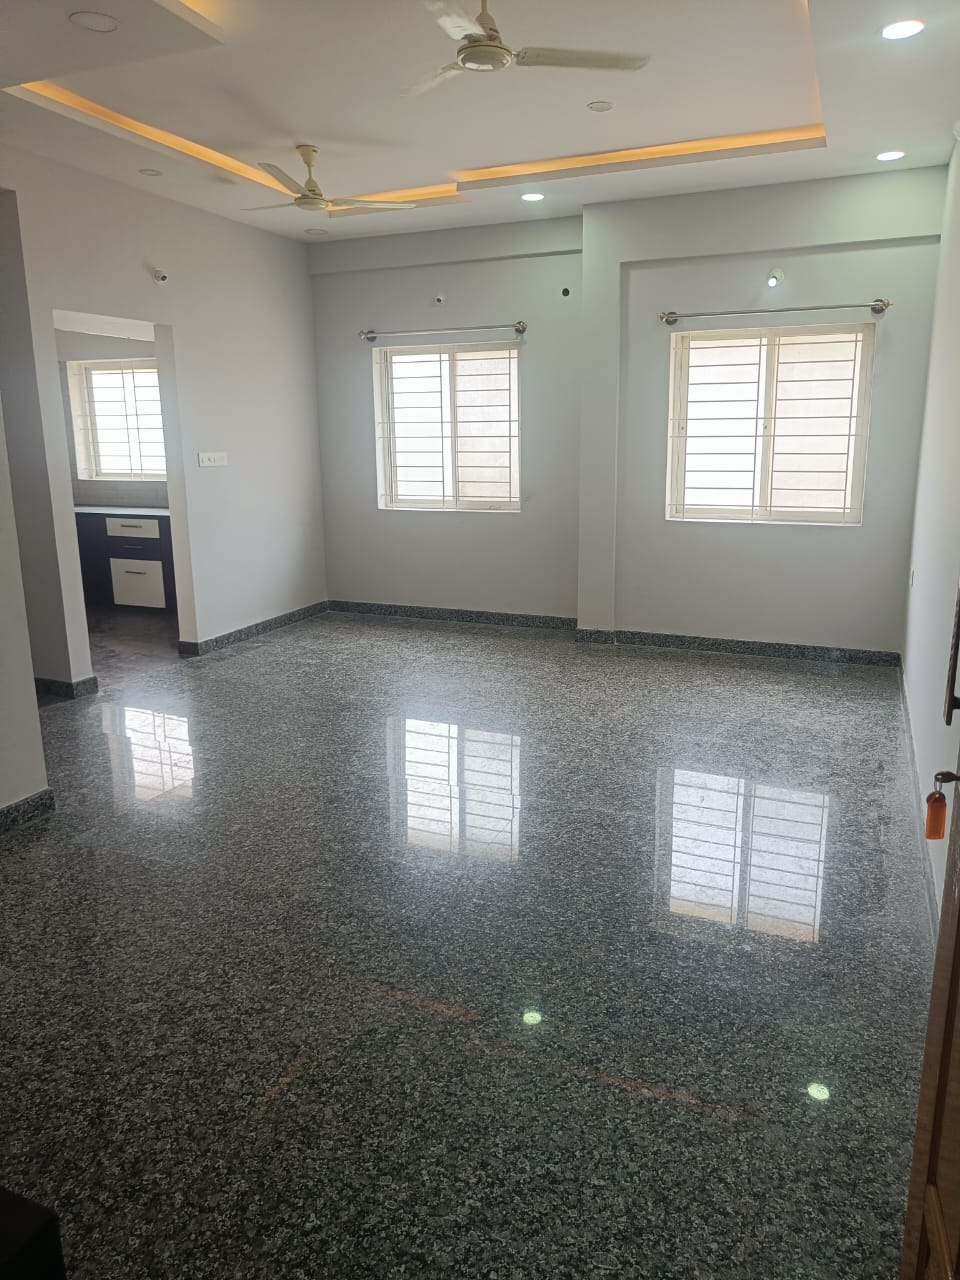 2 BHK Independent House for Lease Only at JAML2 - 3285 in Vijaya Bank Colony